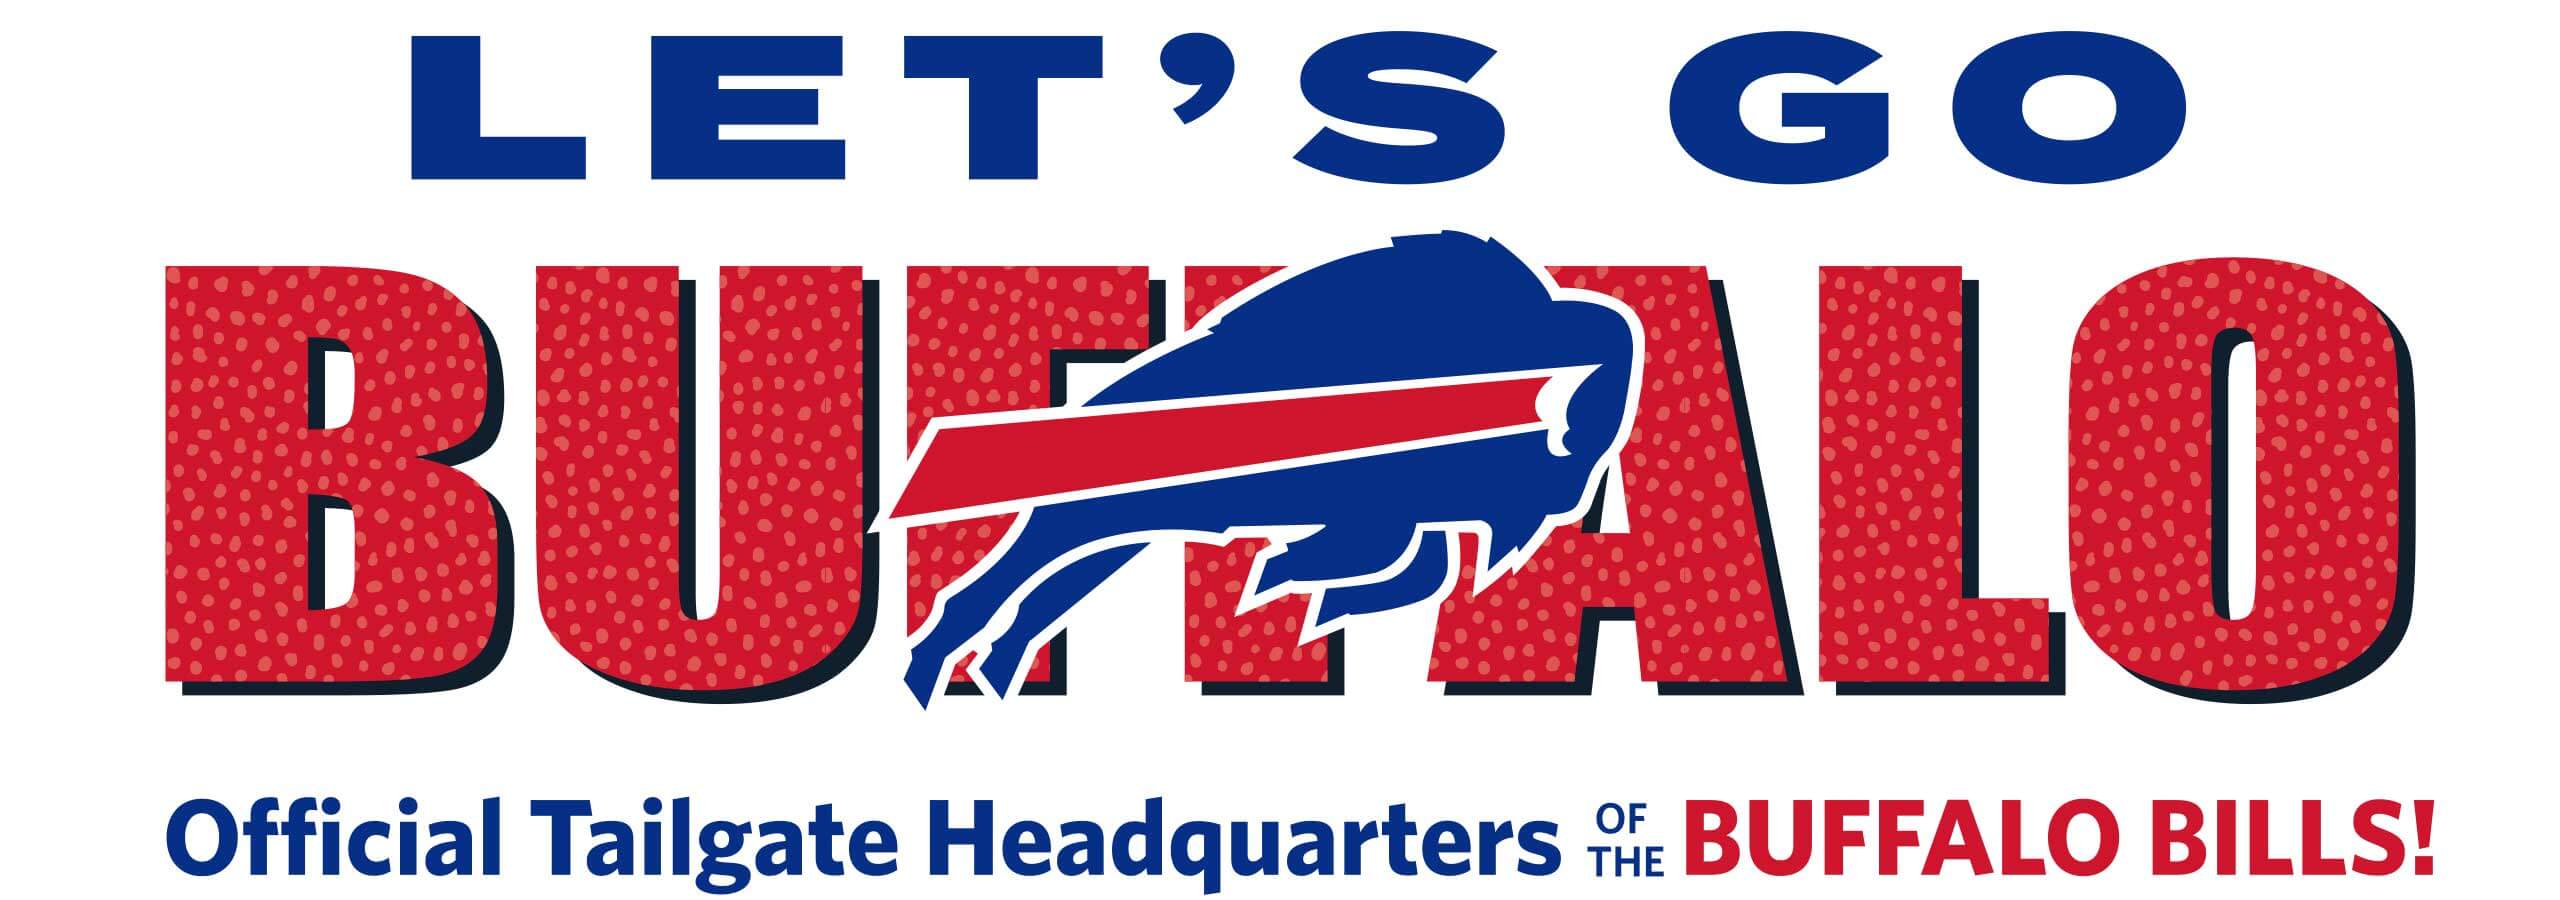 Lets Go Buffalo - official tailgate headquarters of the Buffalo Bills